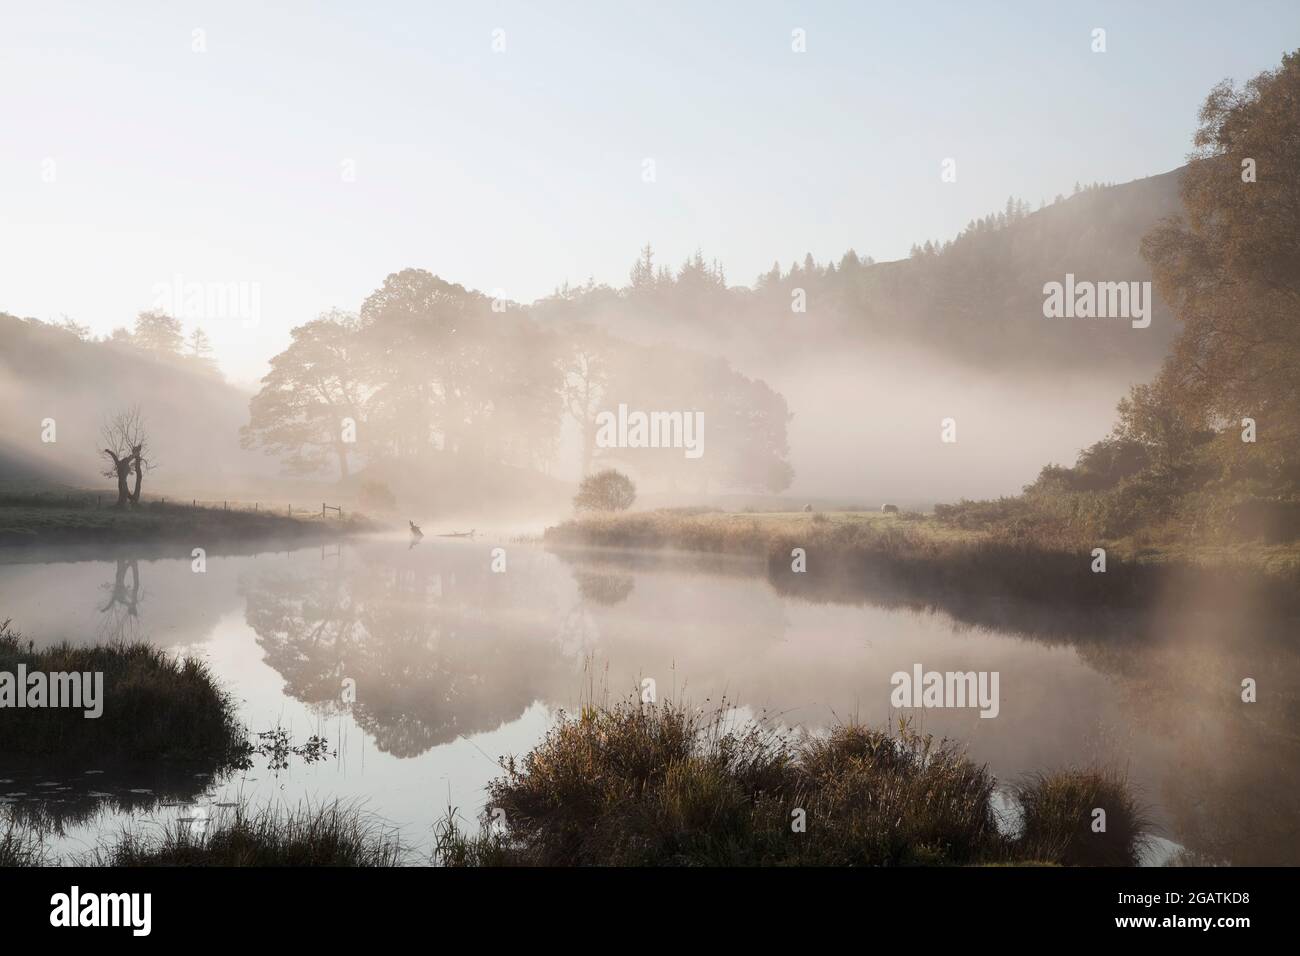 Fiume Barthay vicino Elter Water in una valle foggy Langdale, distretto inglese del lago Foto Stock